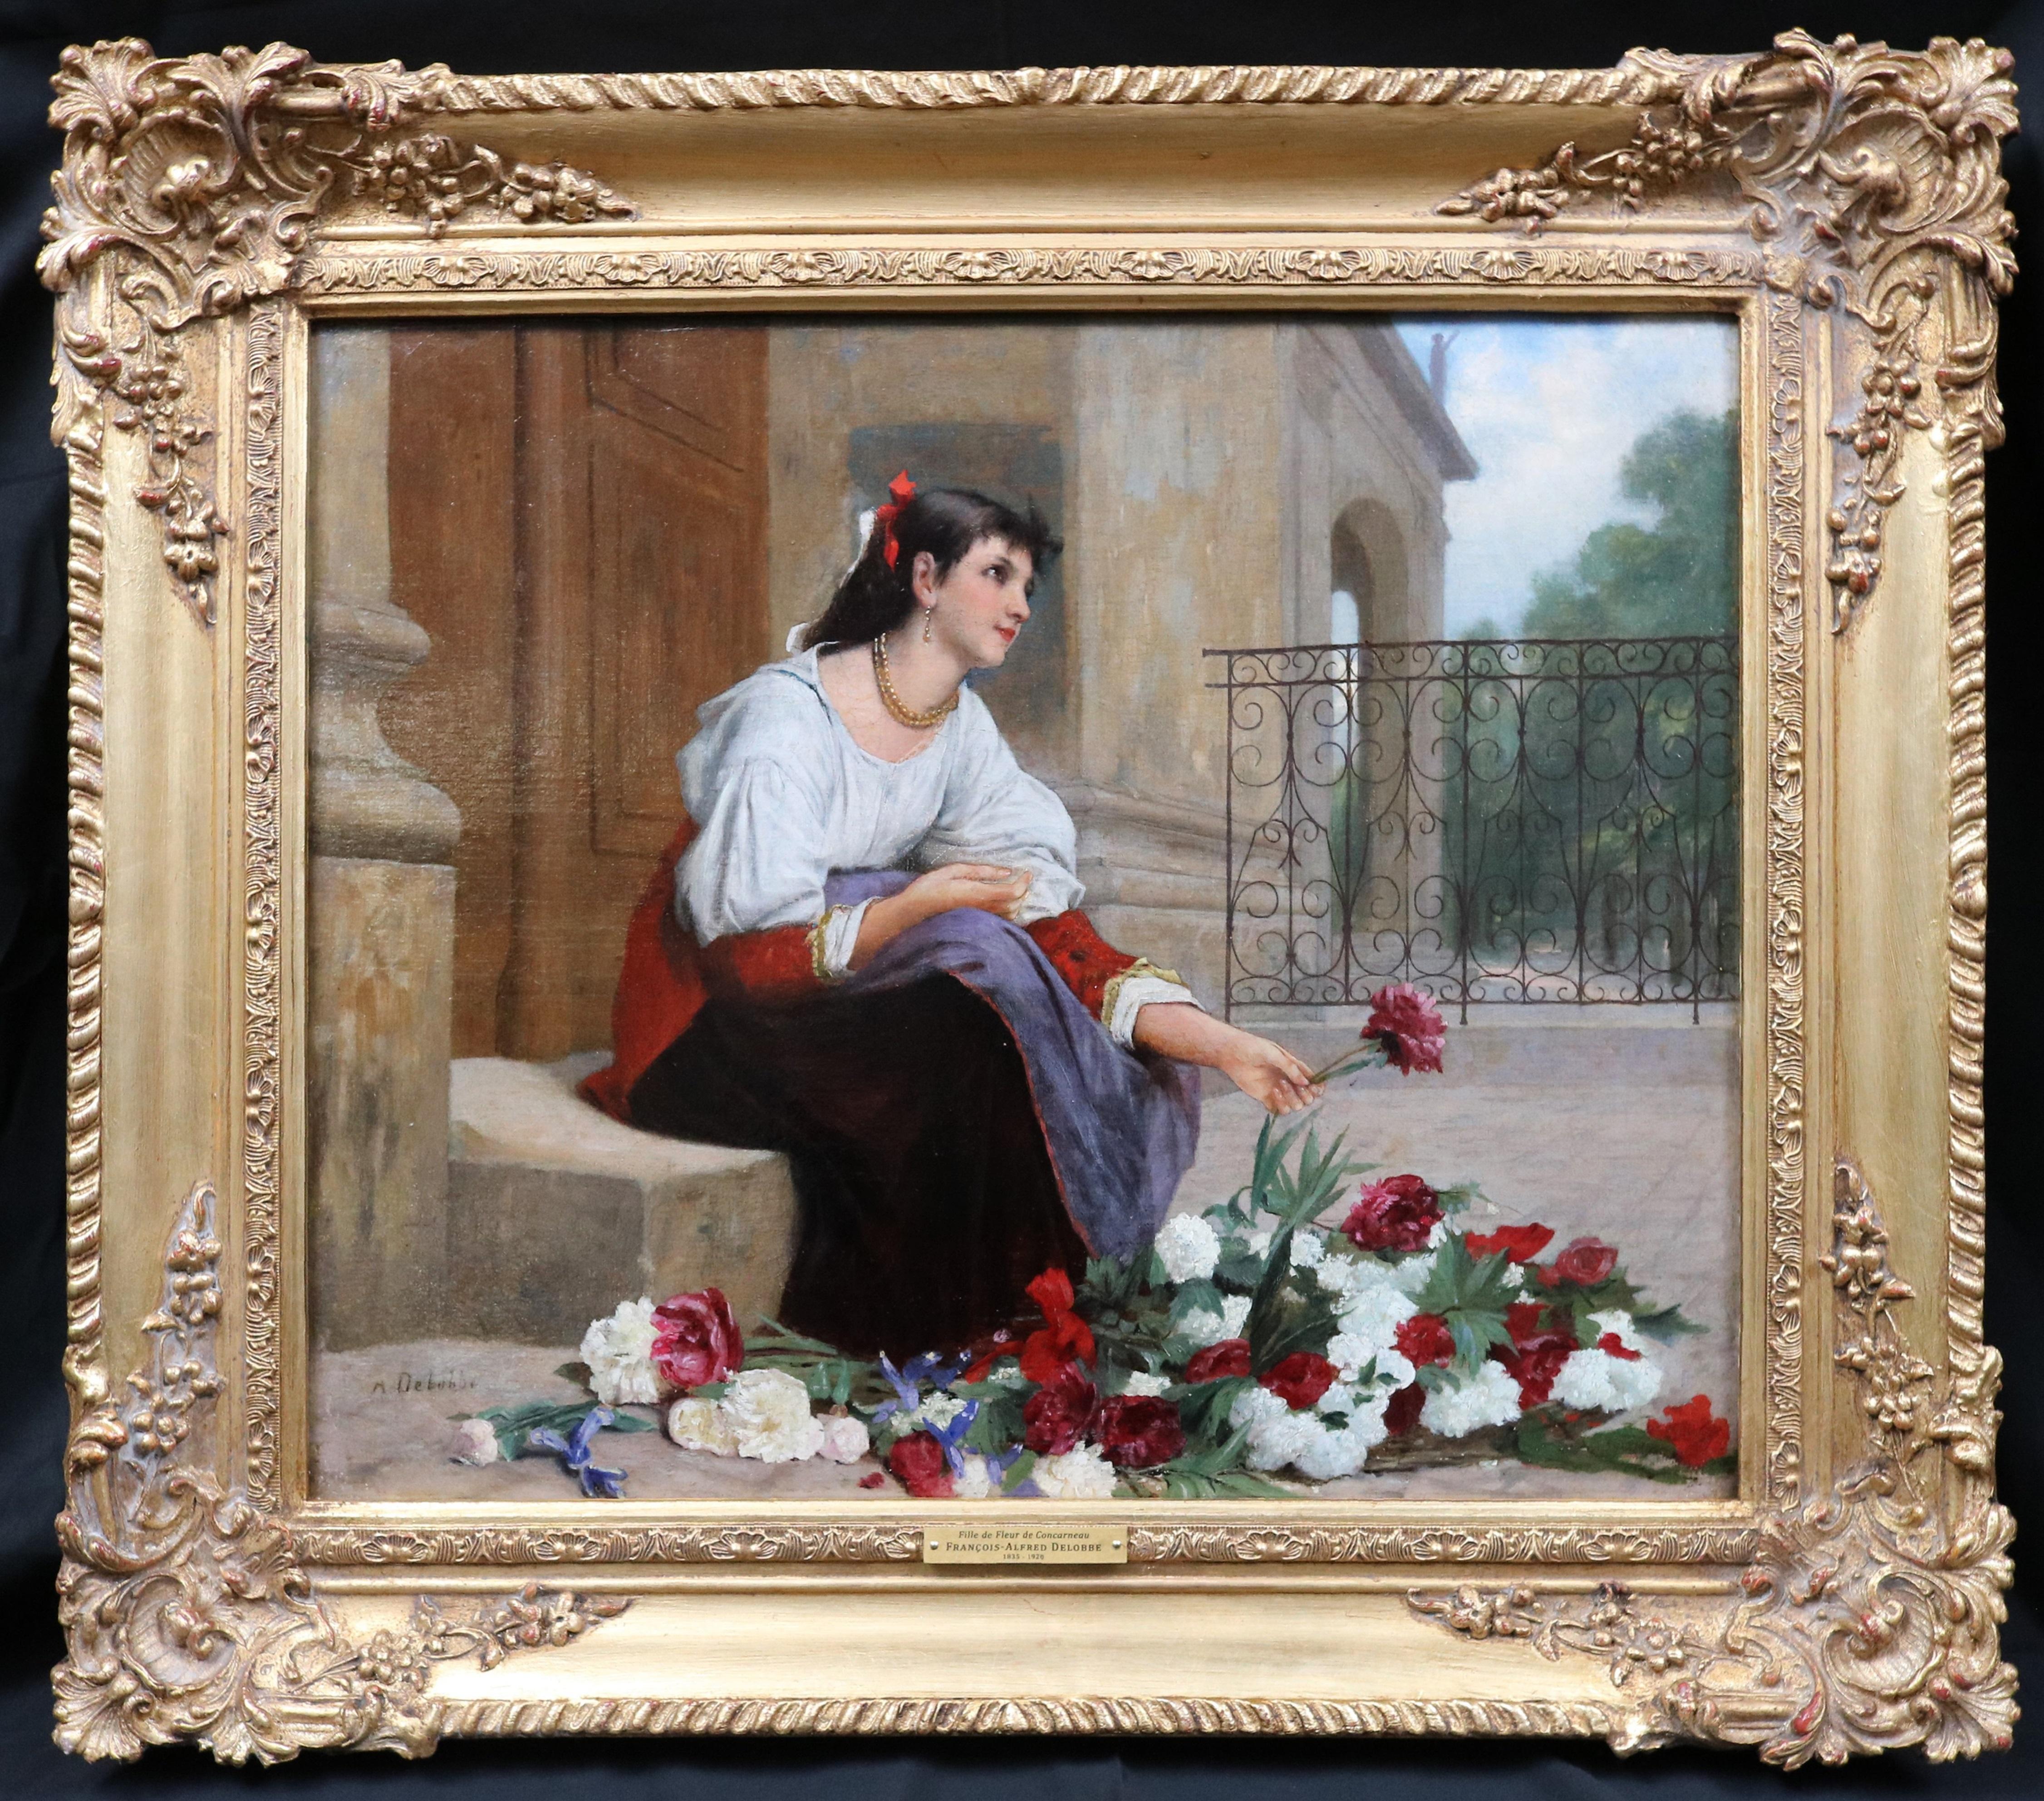 'Fille de Fleur de Concarneau' by François-Alfred Delobbe (1835-1920).

The painting – which depicts a girl selling peonies in Concarneau on the coast of Brittany in North-West France – is signed by the artists and presented in a newly commissioned